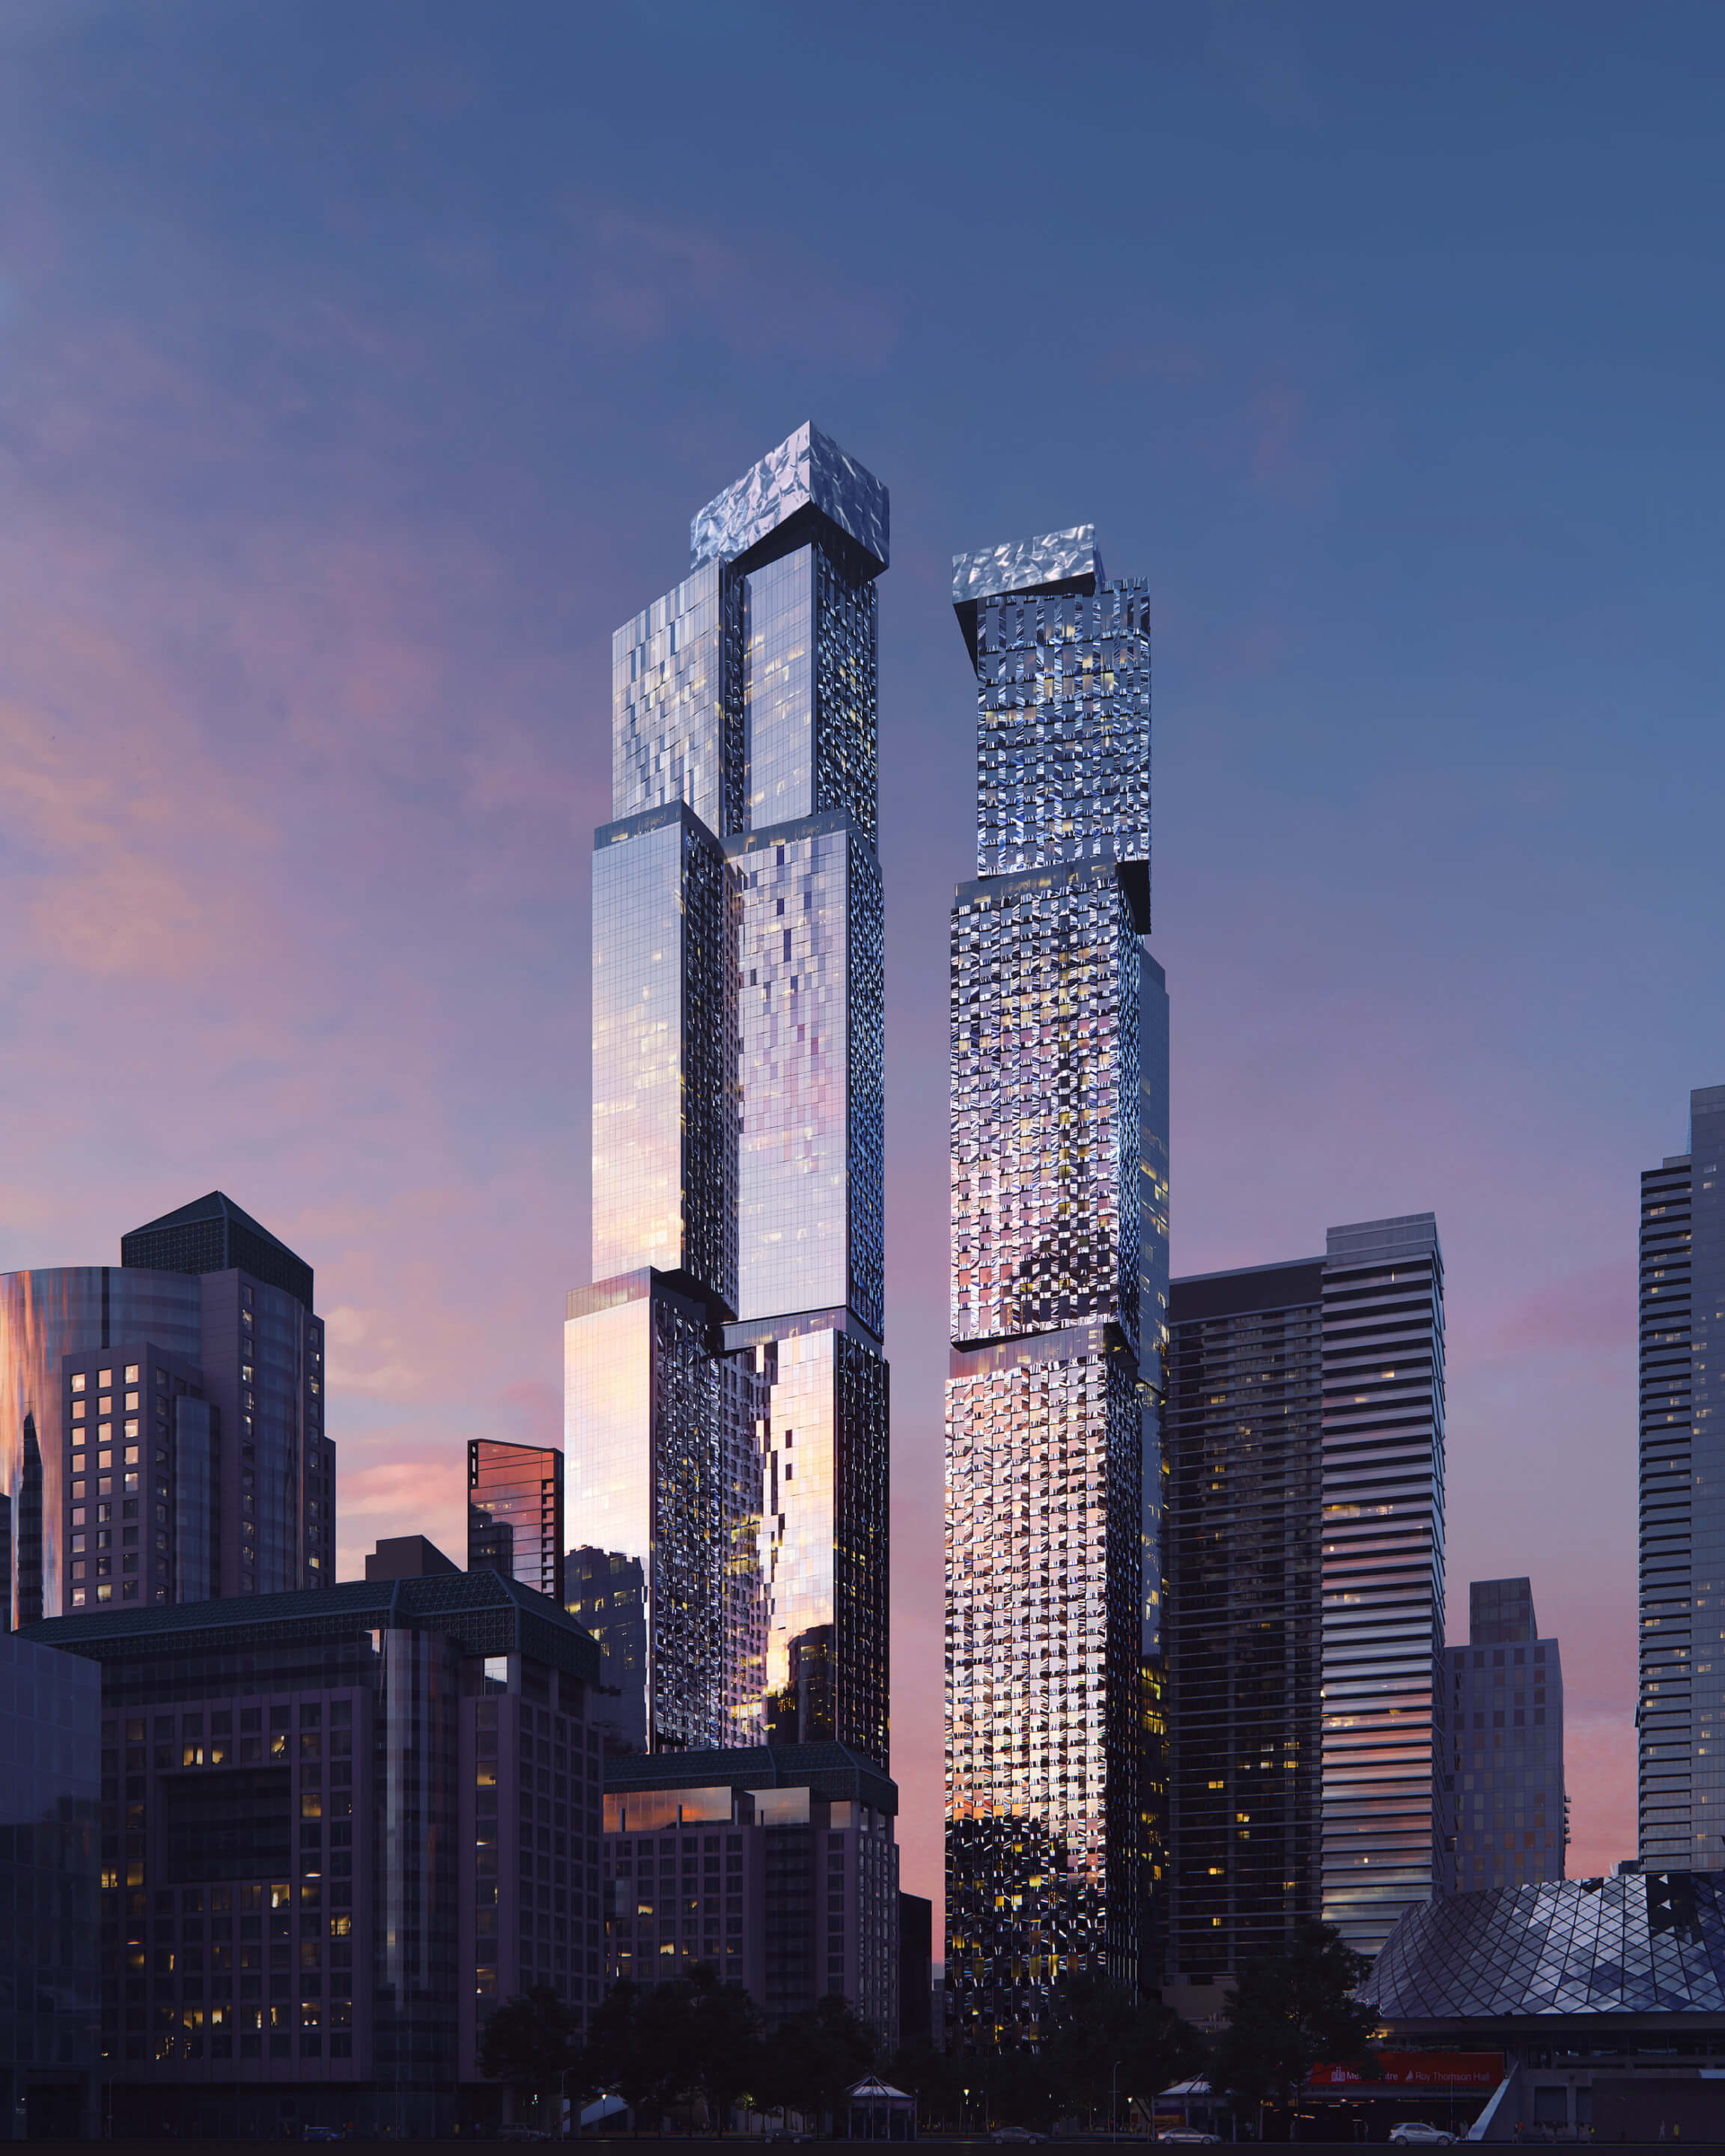 renderings of two skyscrapers and the toronto skyline designed by frank gehry